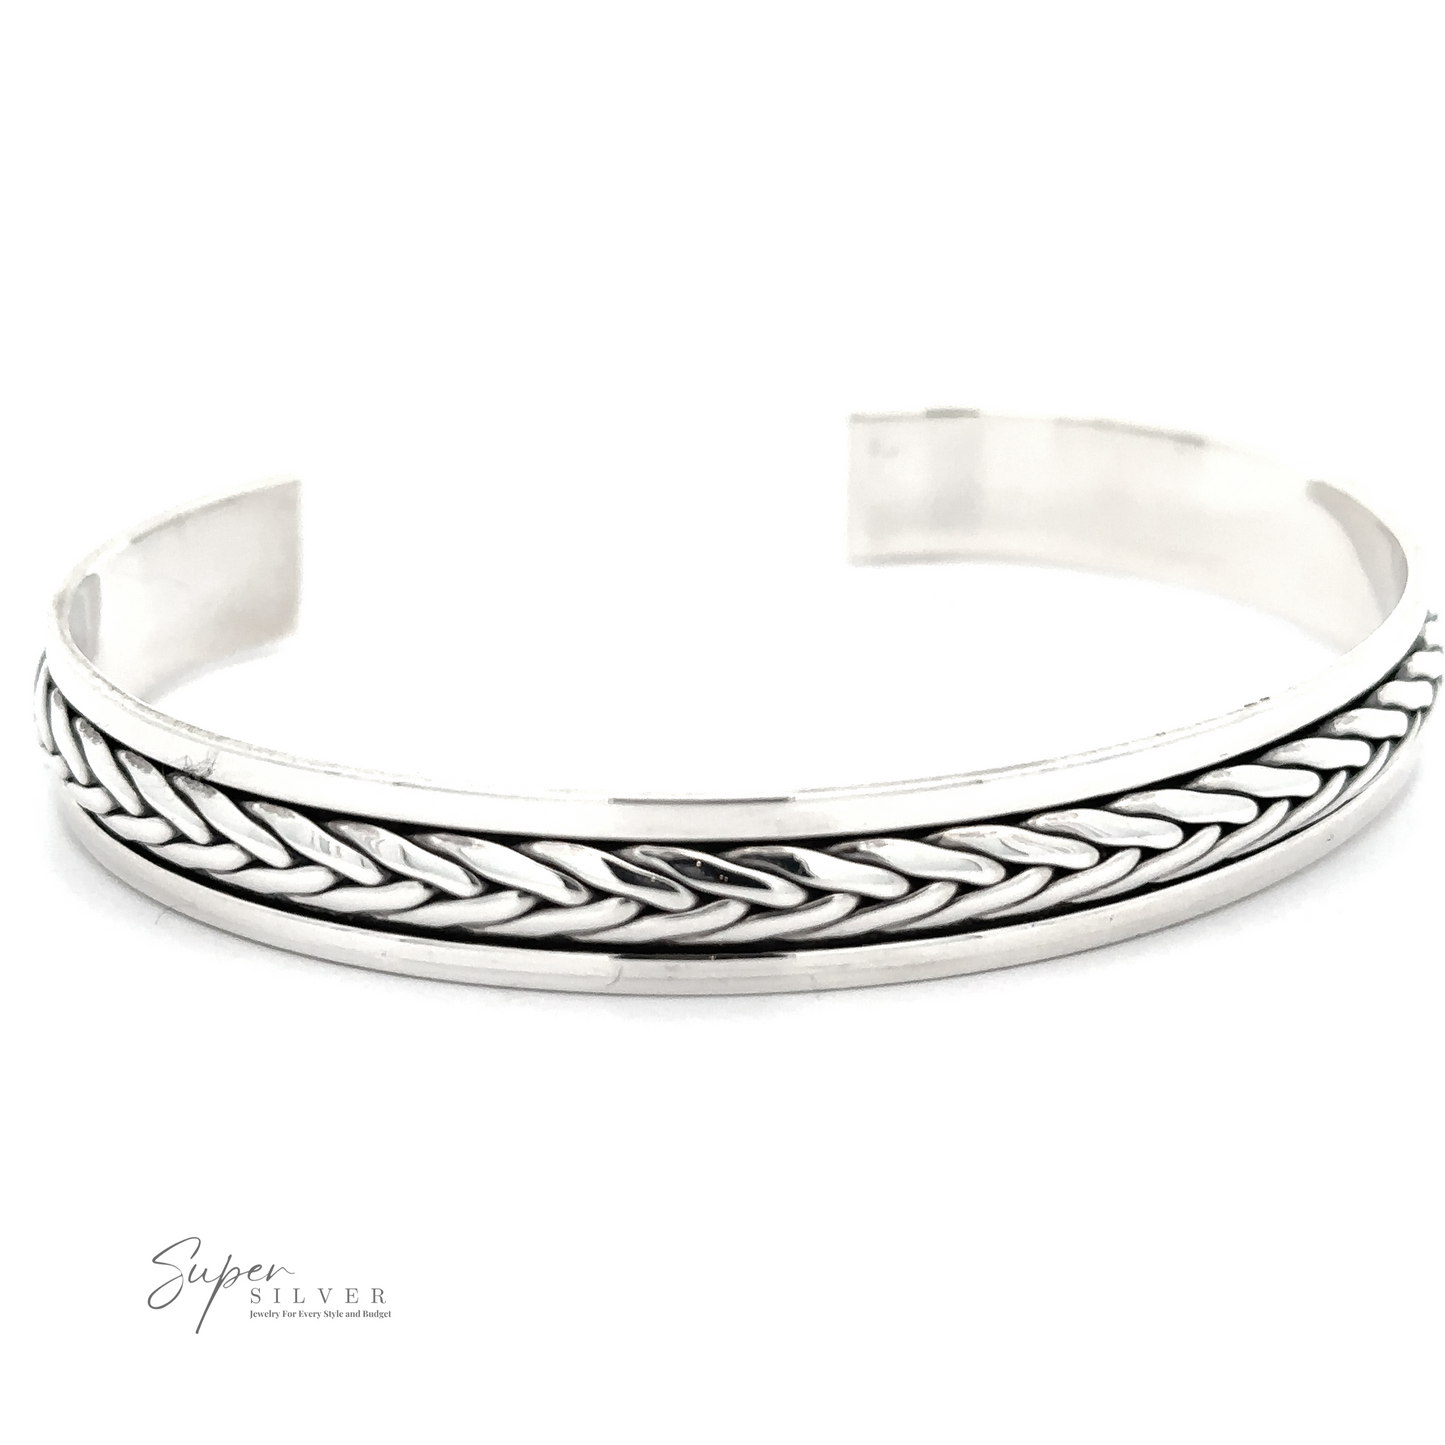 A Braided Cuff Bracelet with a braided design in the center, featuring the brand name "Super Silver" in the bottom left corner.